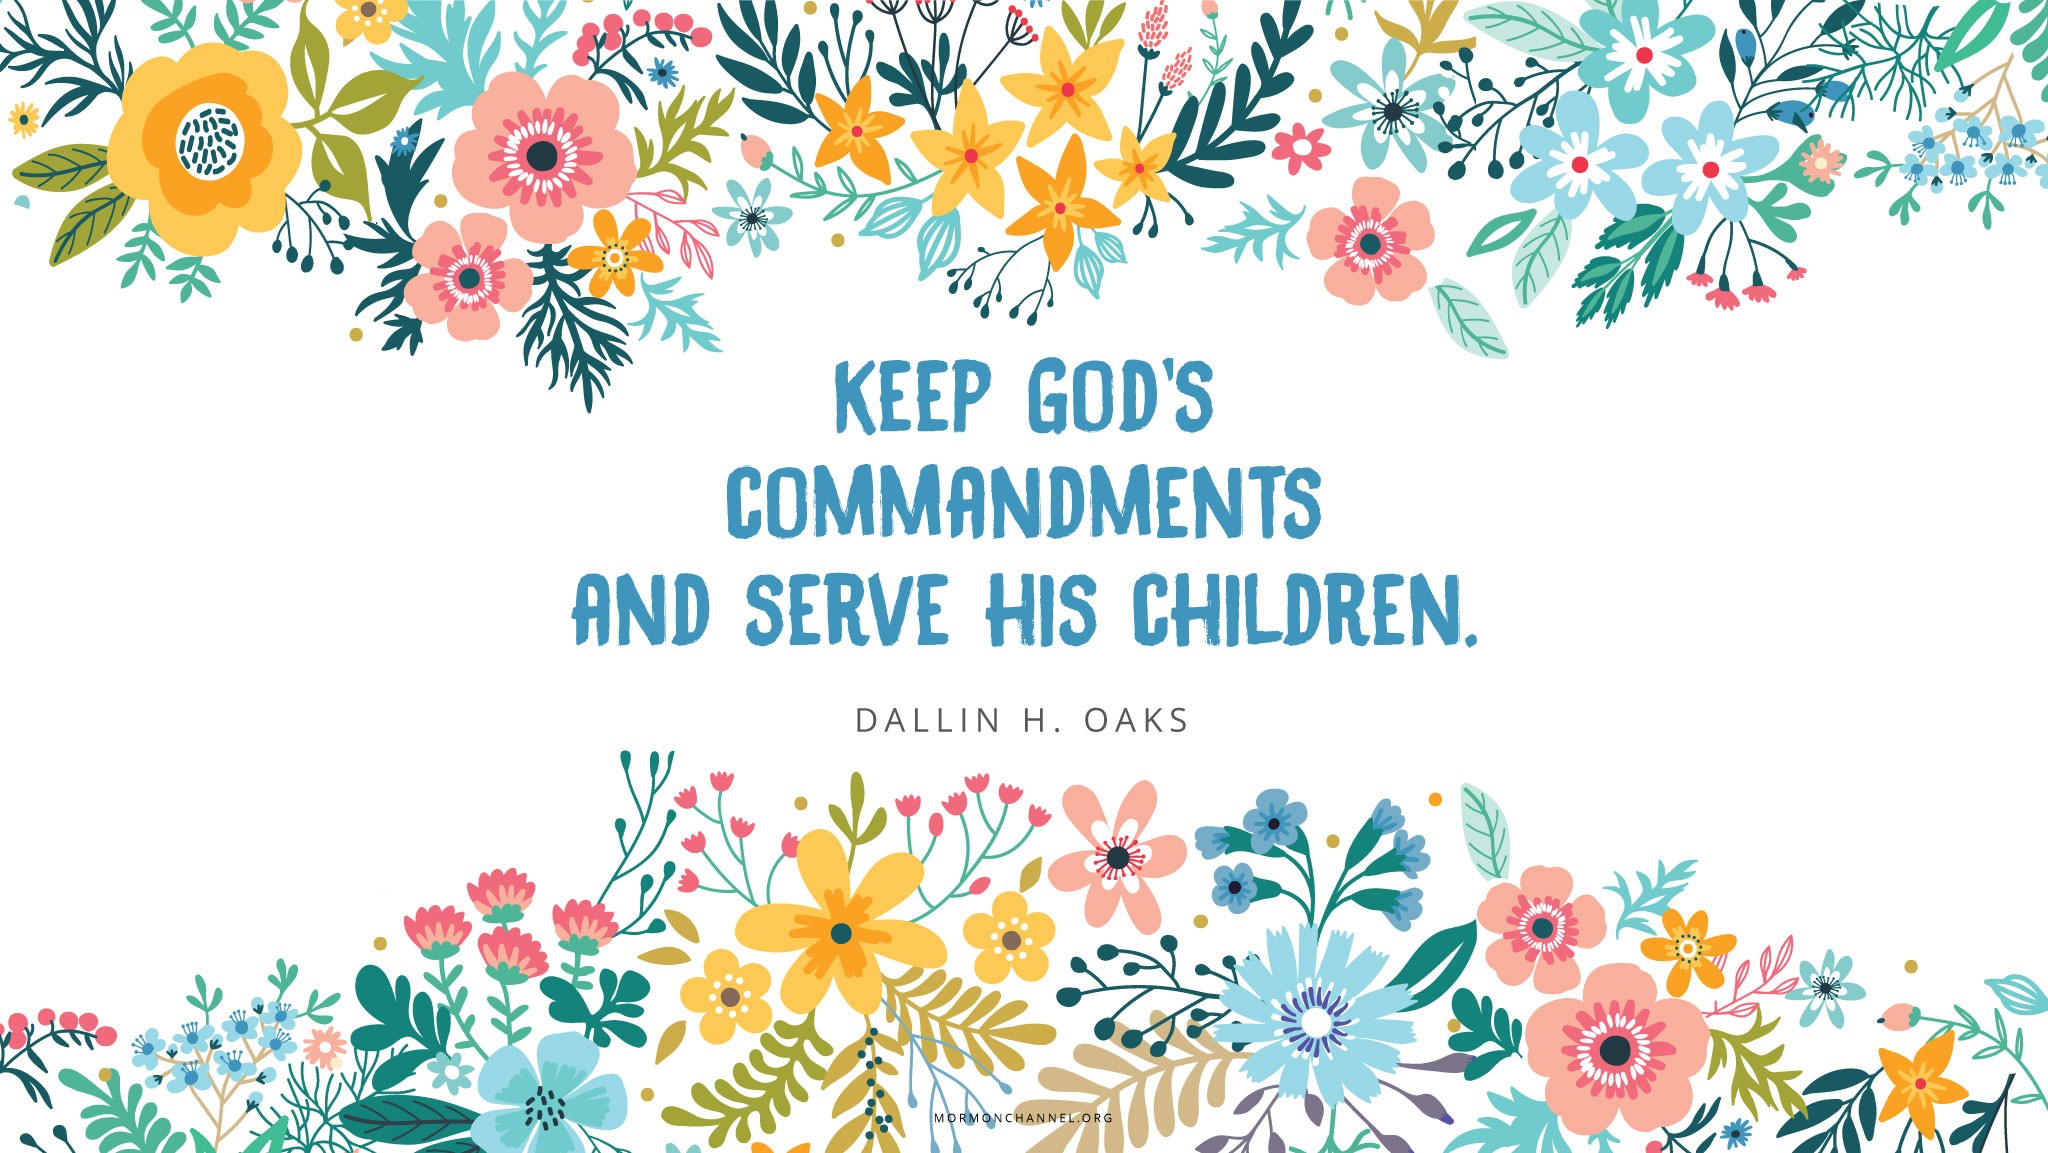 An illustration of colorful flowers with a quote by Elder Dallin H. Oaks: “Keep God’s commandments and serve his children.”